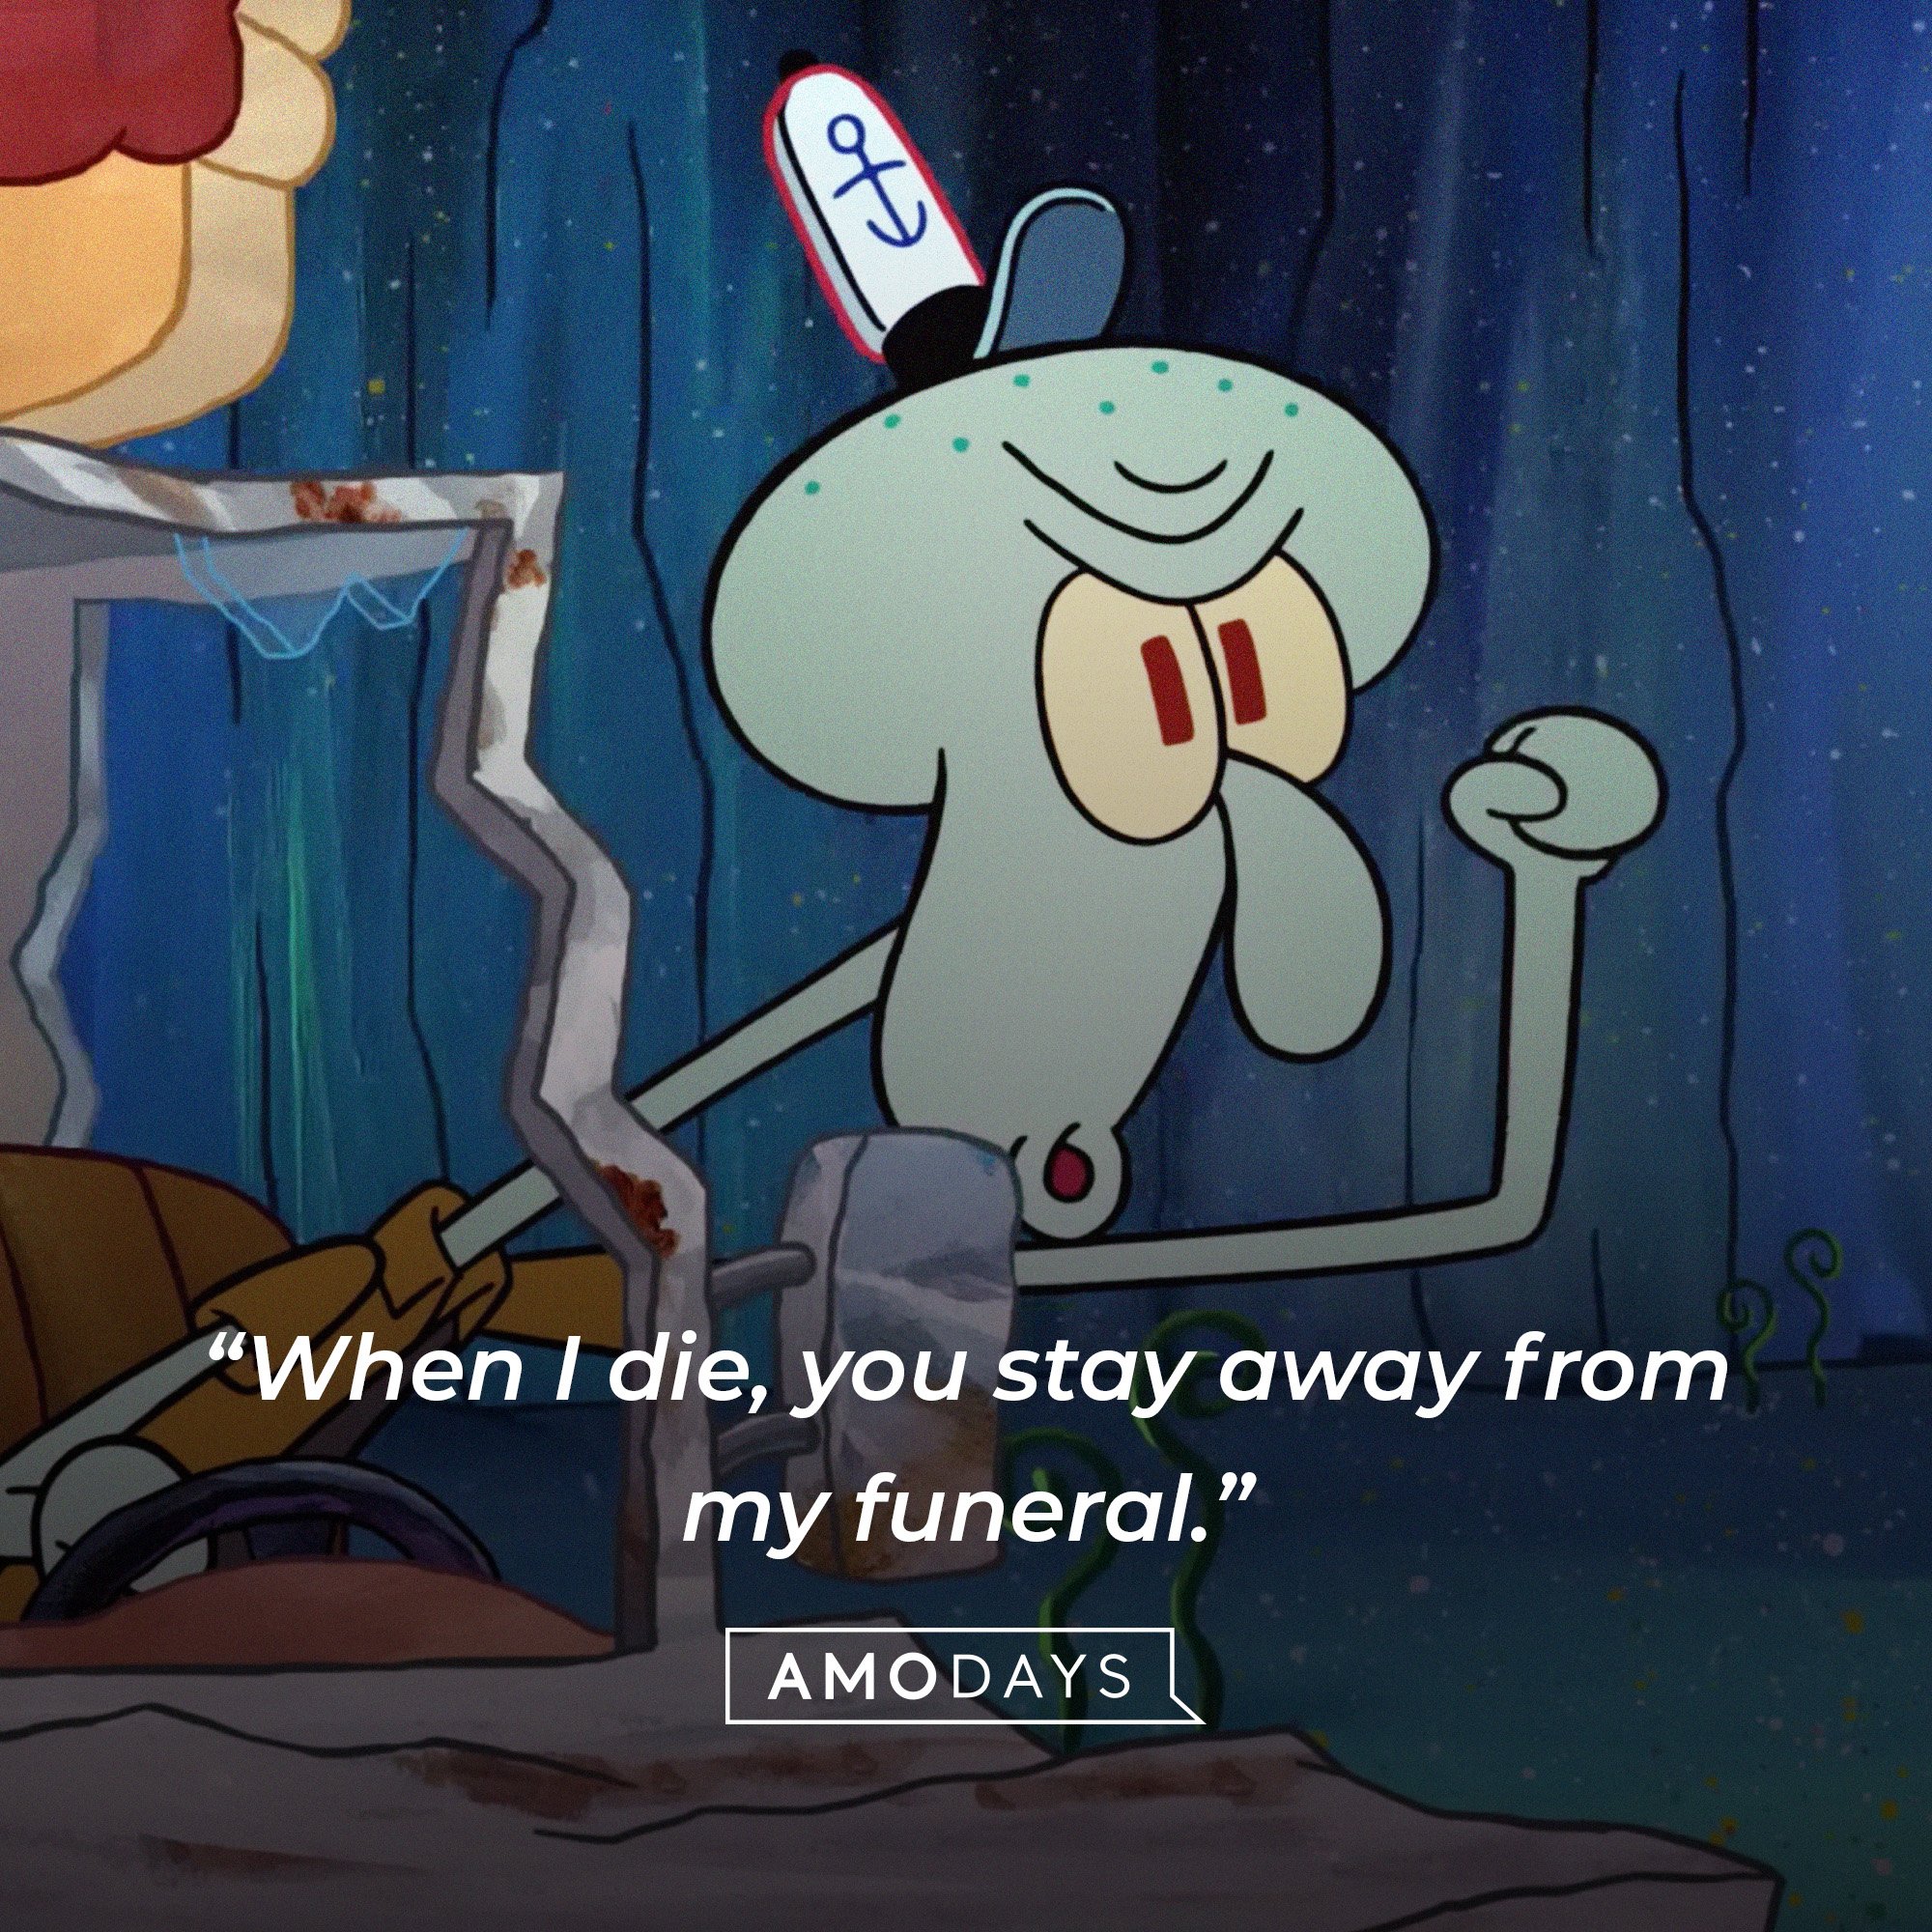 Squidward Tentacles’ quote: “When I die, you stay away from my funeral.” | Source: AmoDays